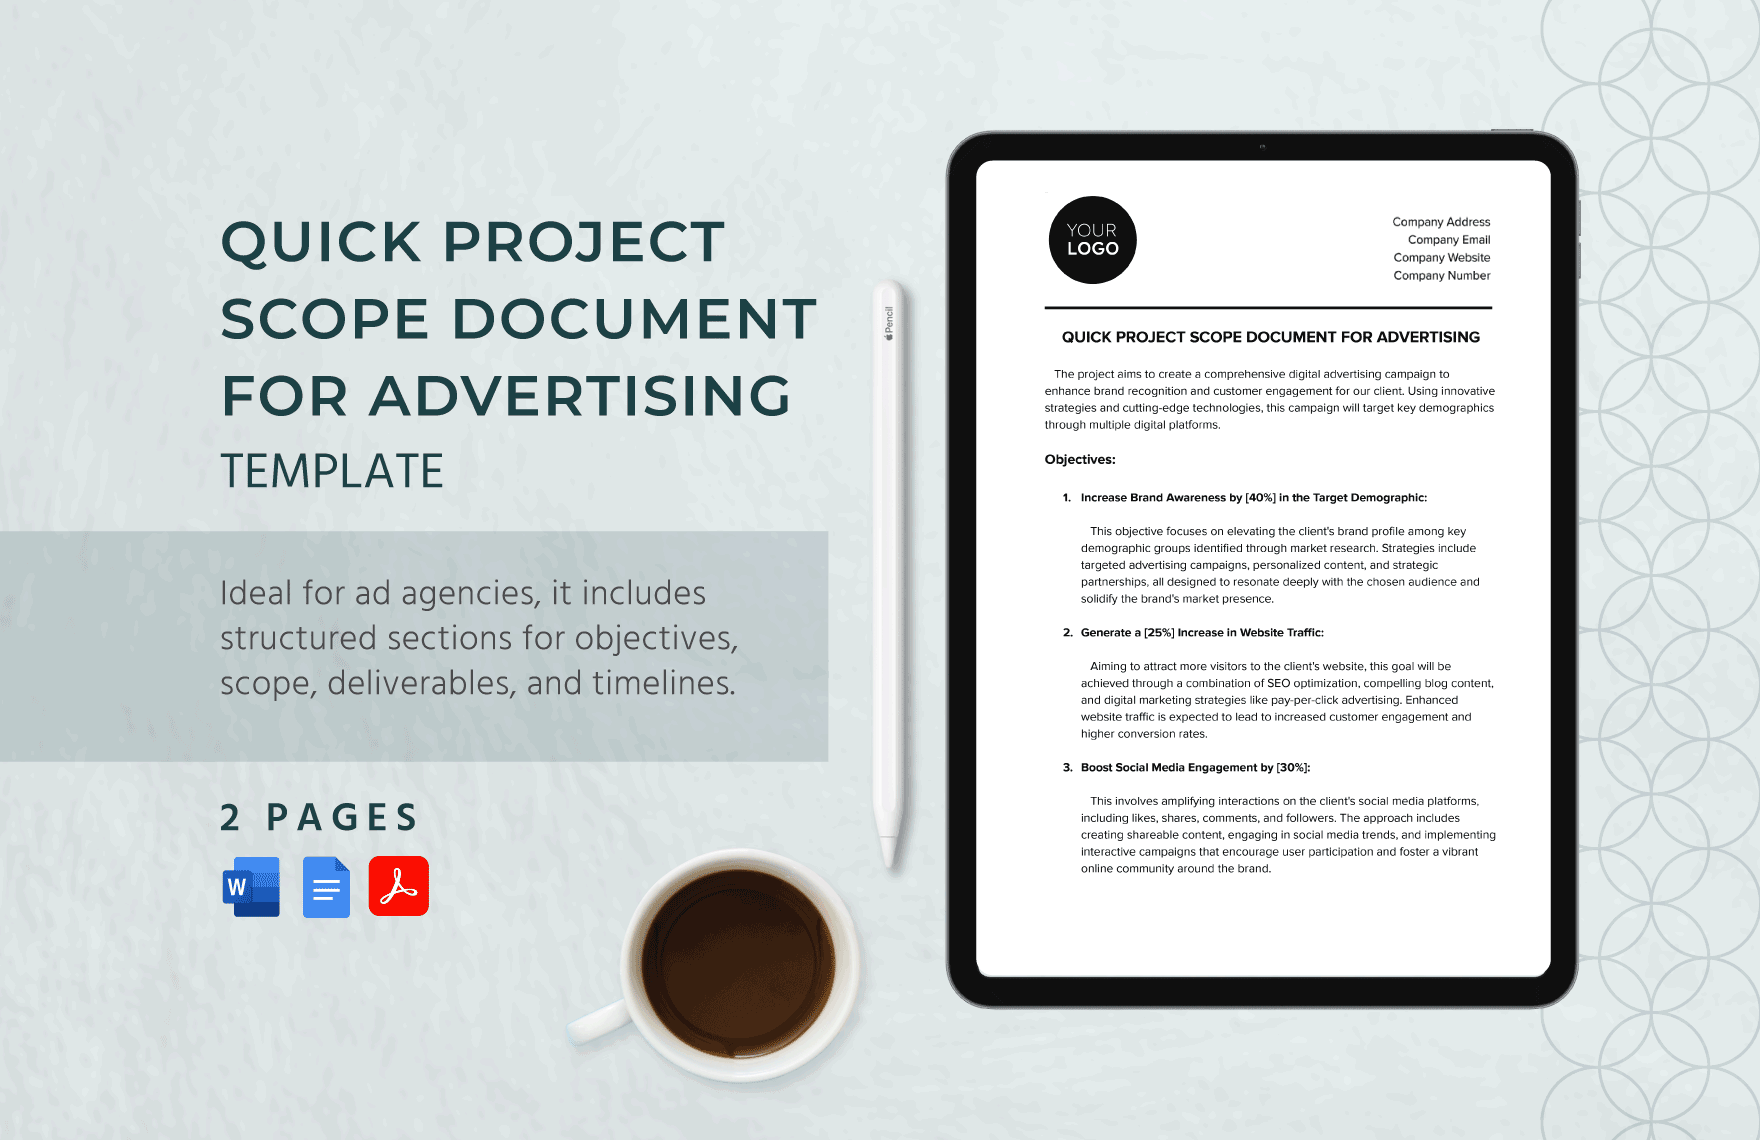 Quick Project Scope Document for Advertising Template